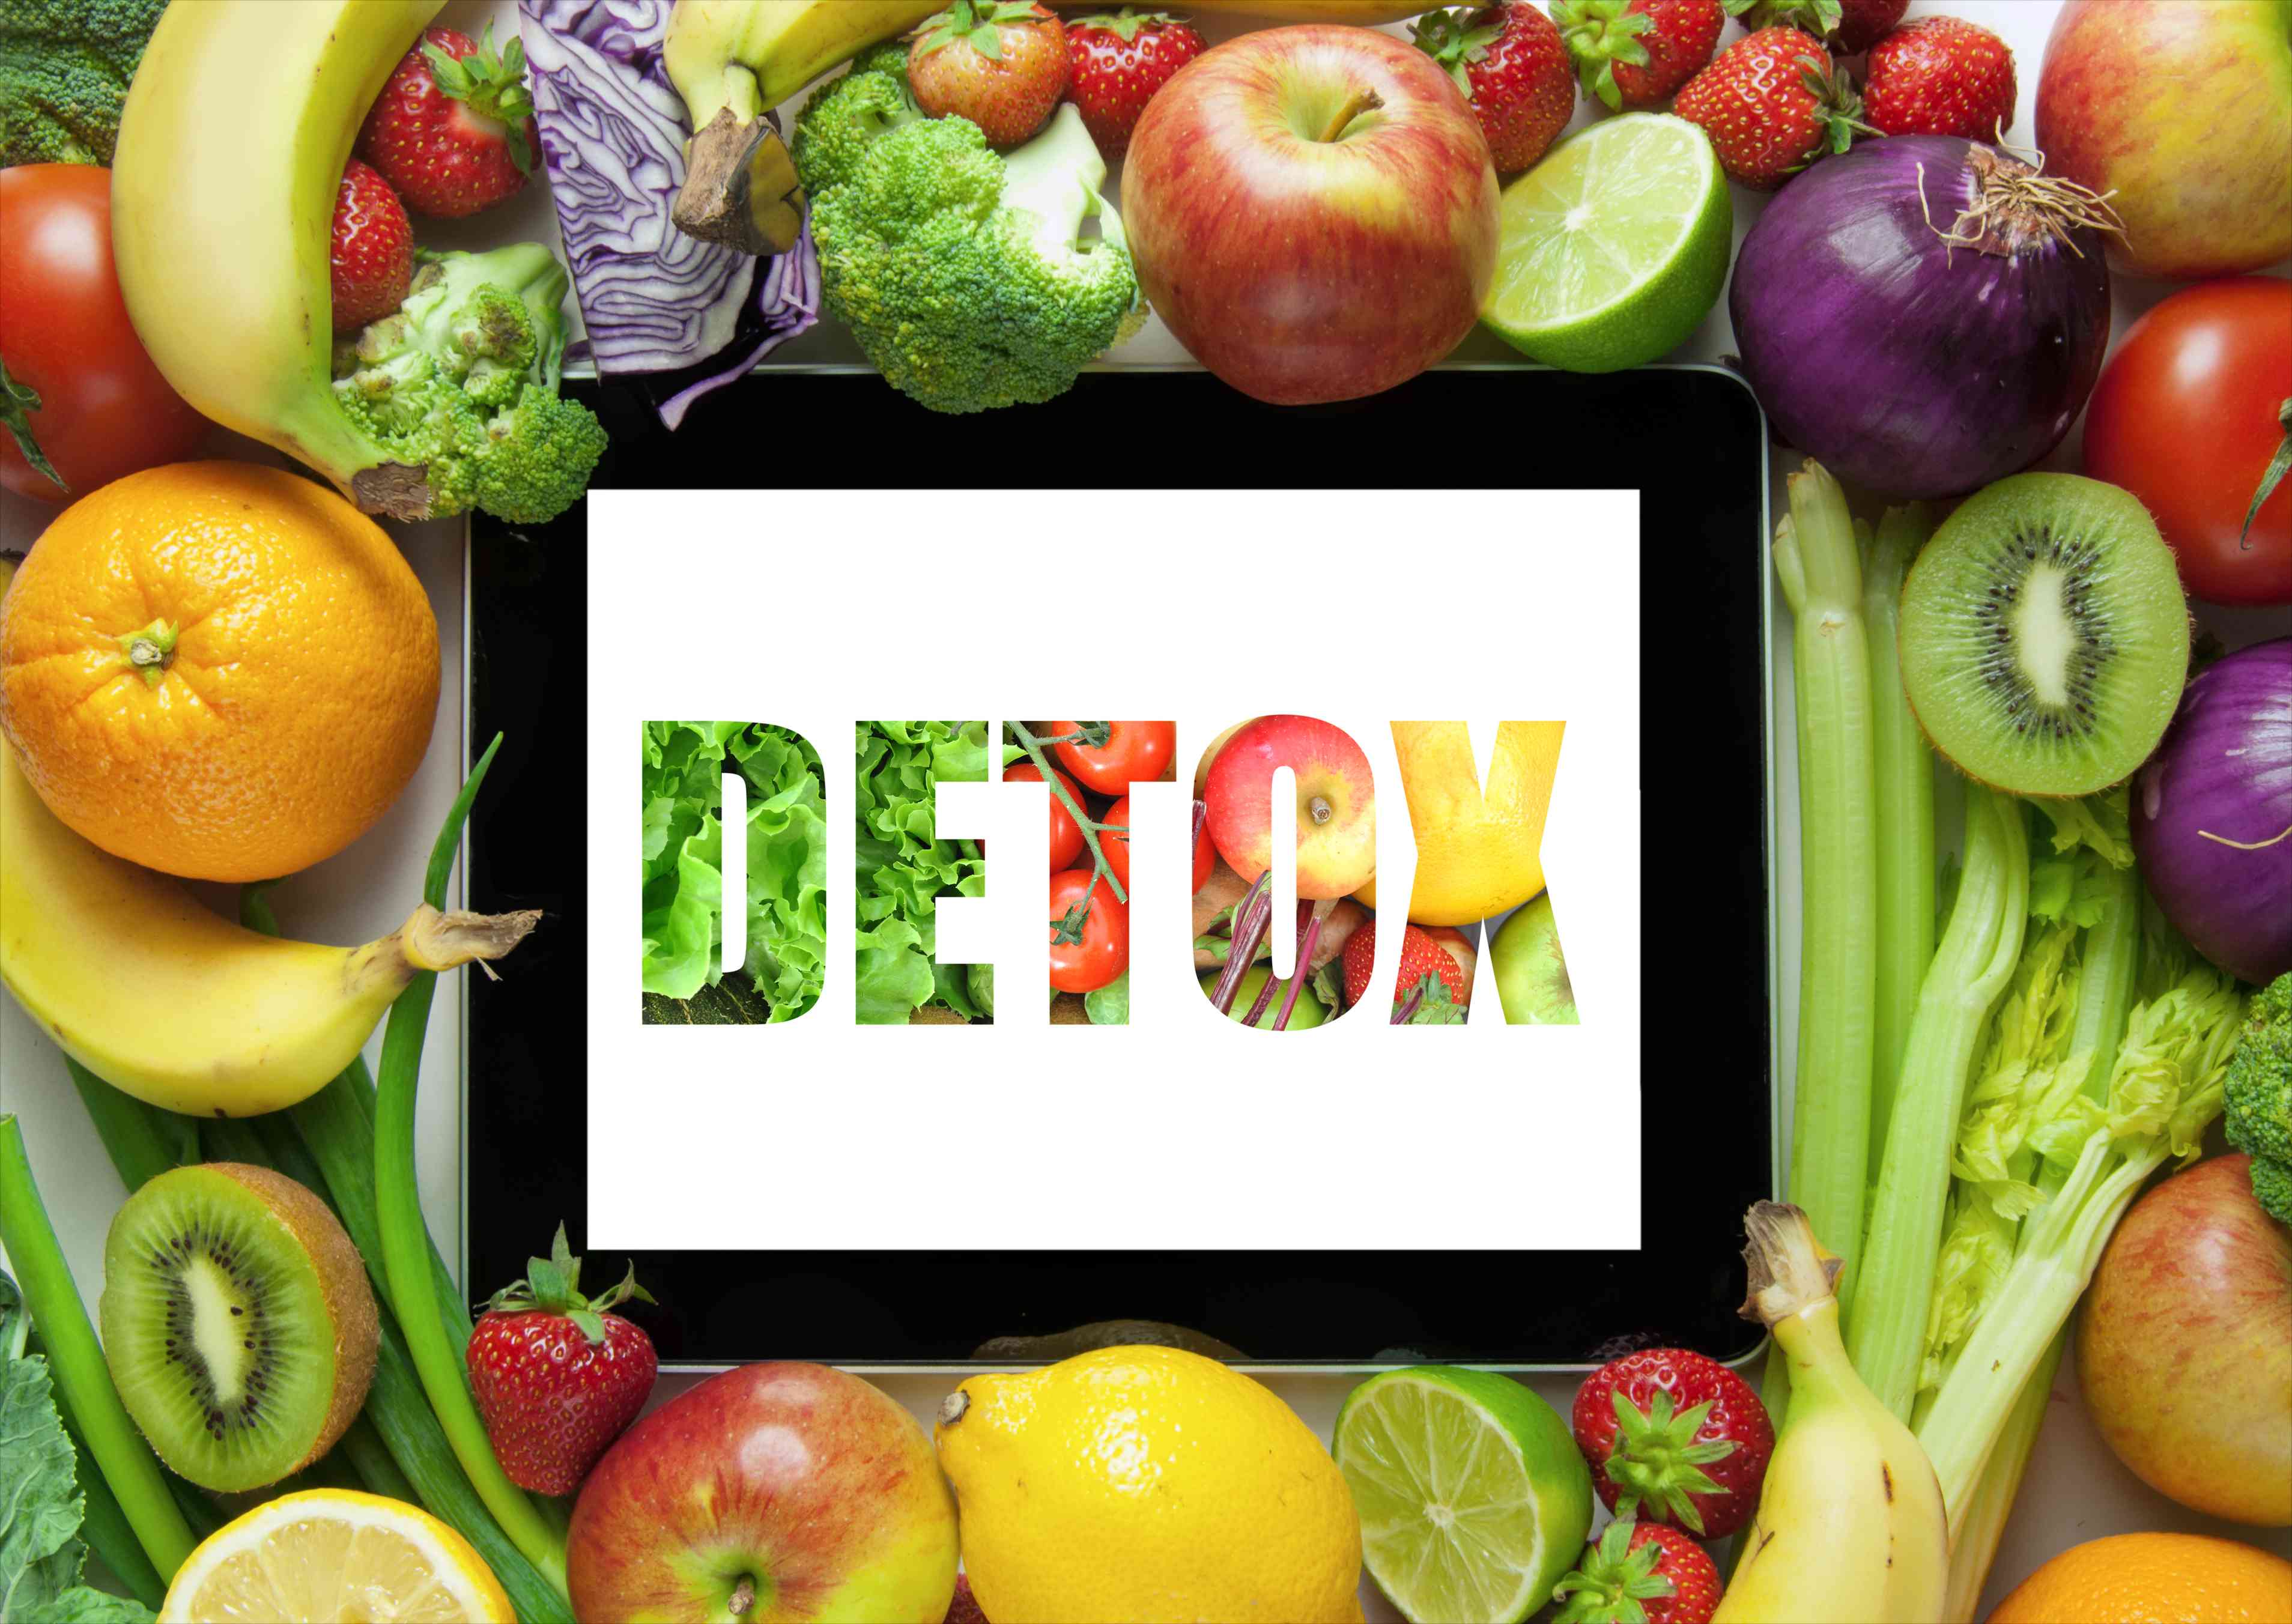 A Simple 5-Day Detox Plan to Lose Weight